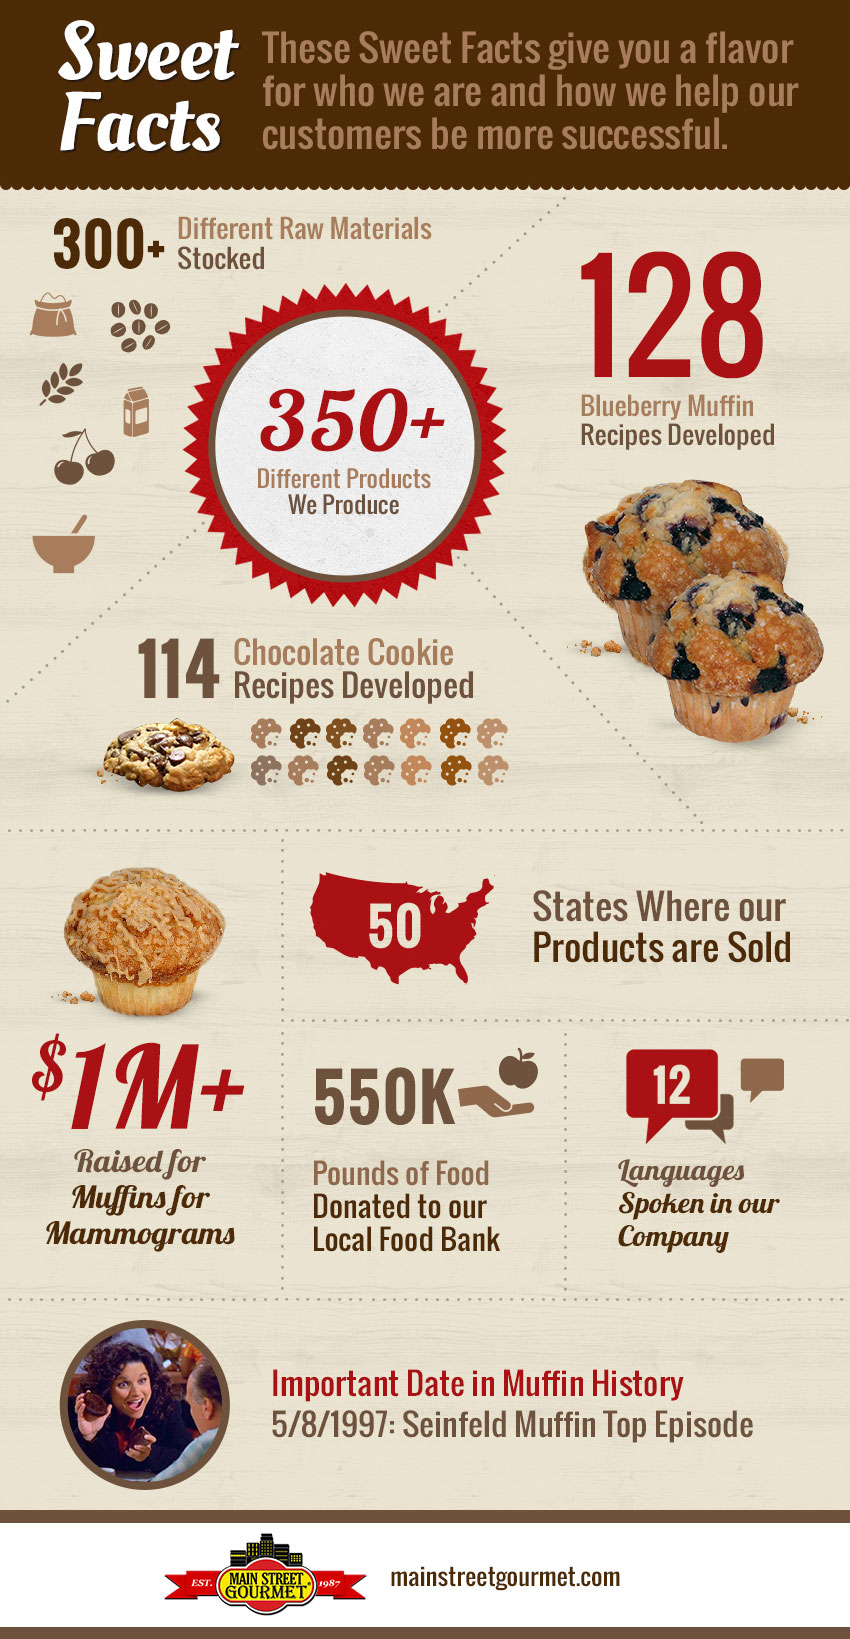 Sweet Facts Infographic